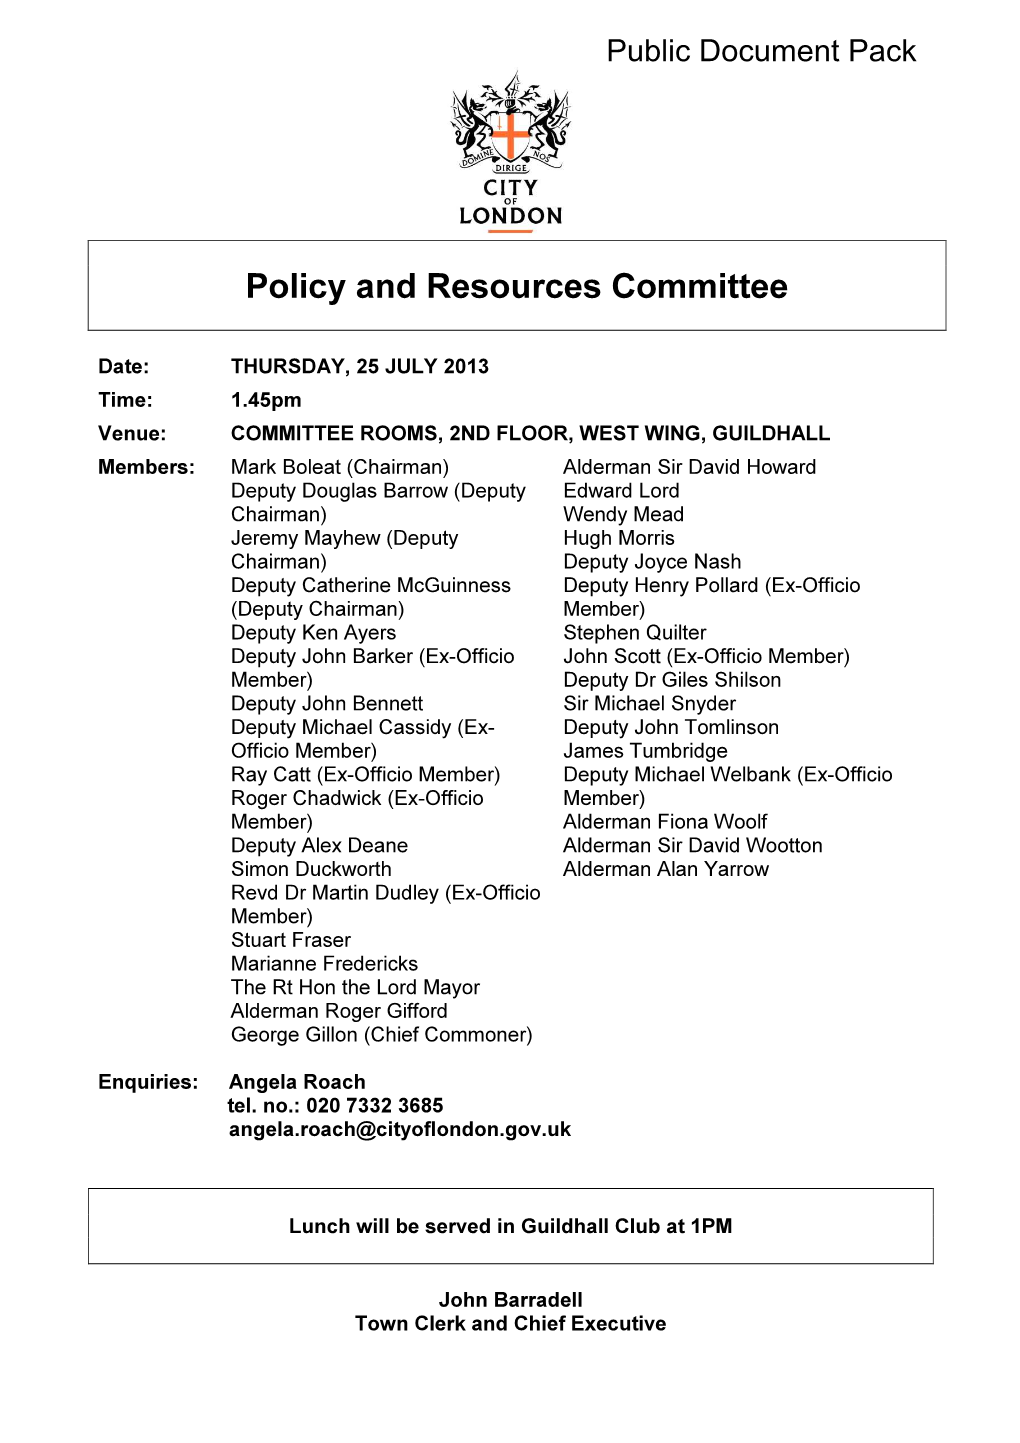 Policy and Resources Committee